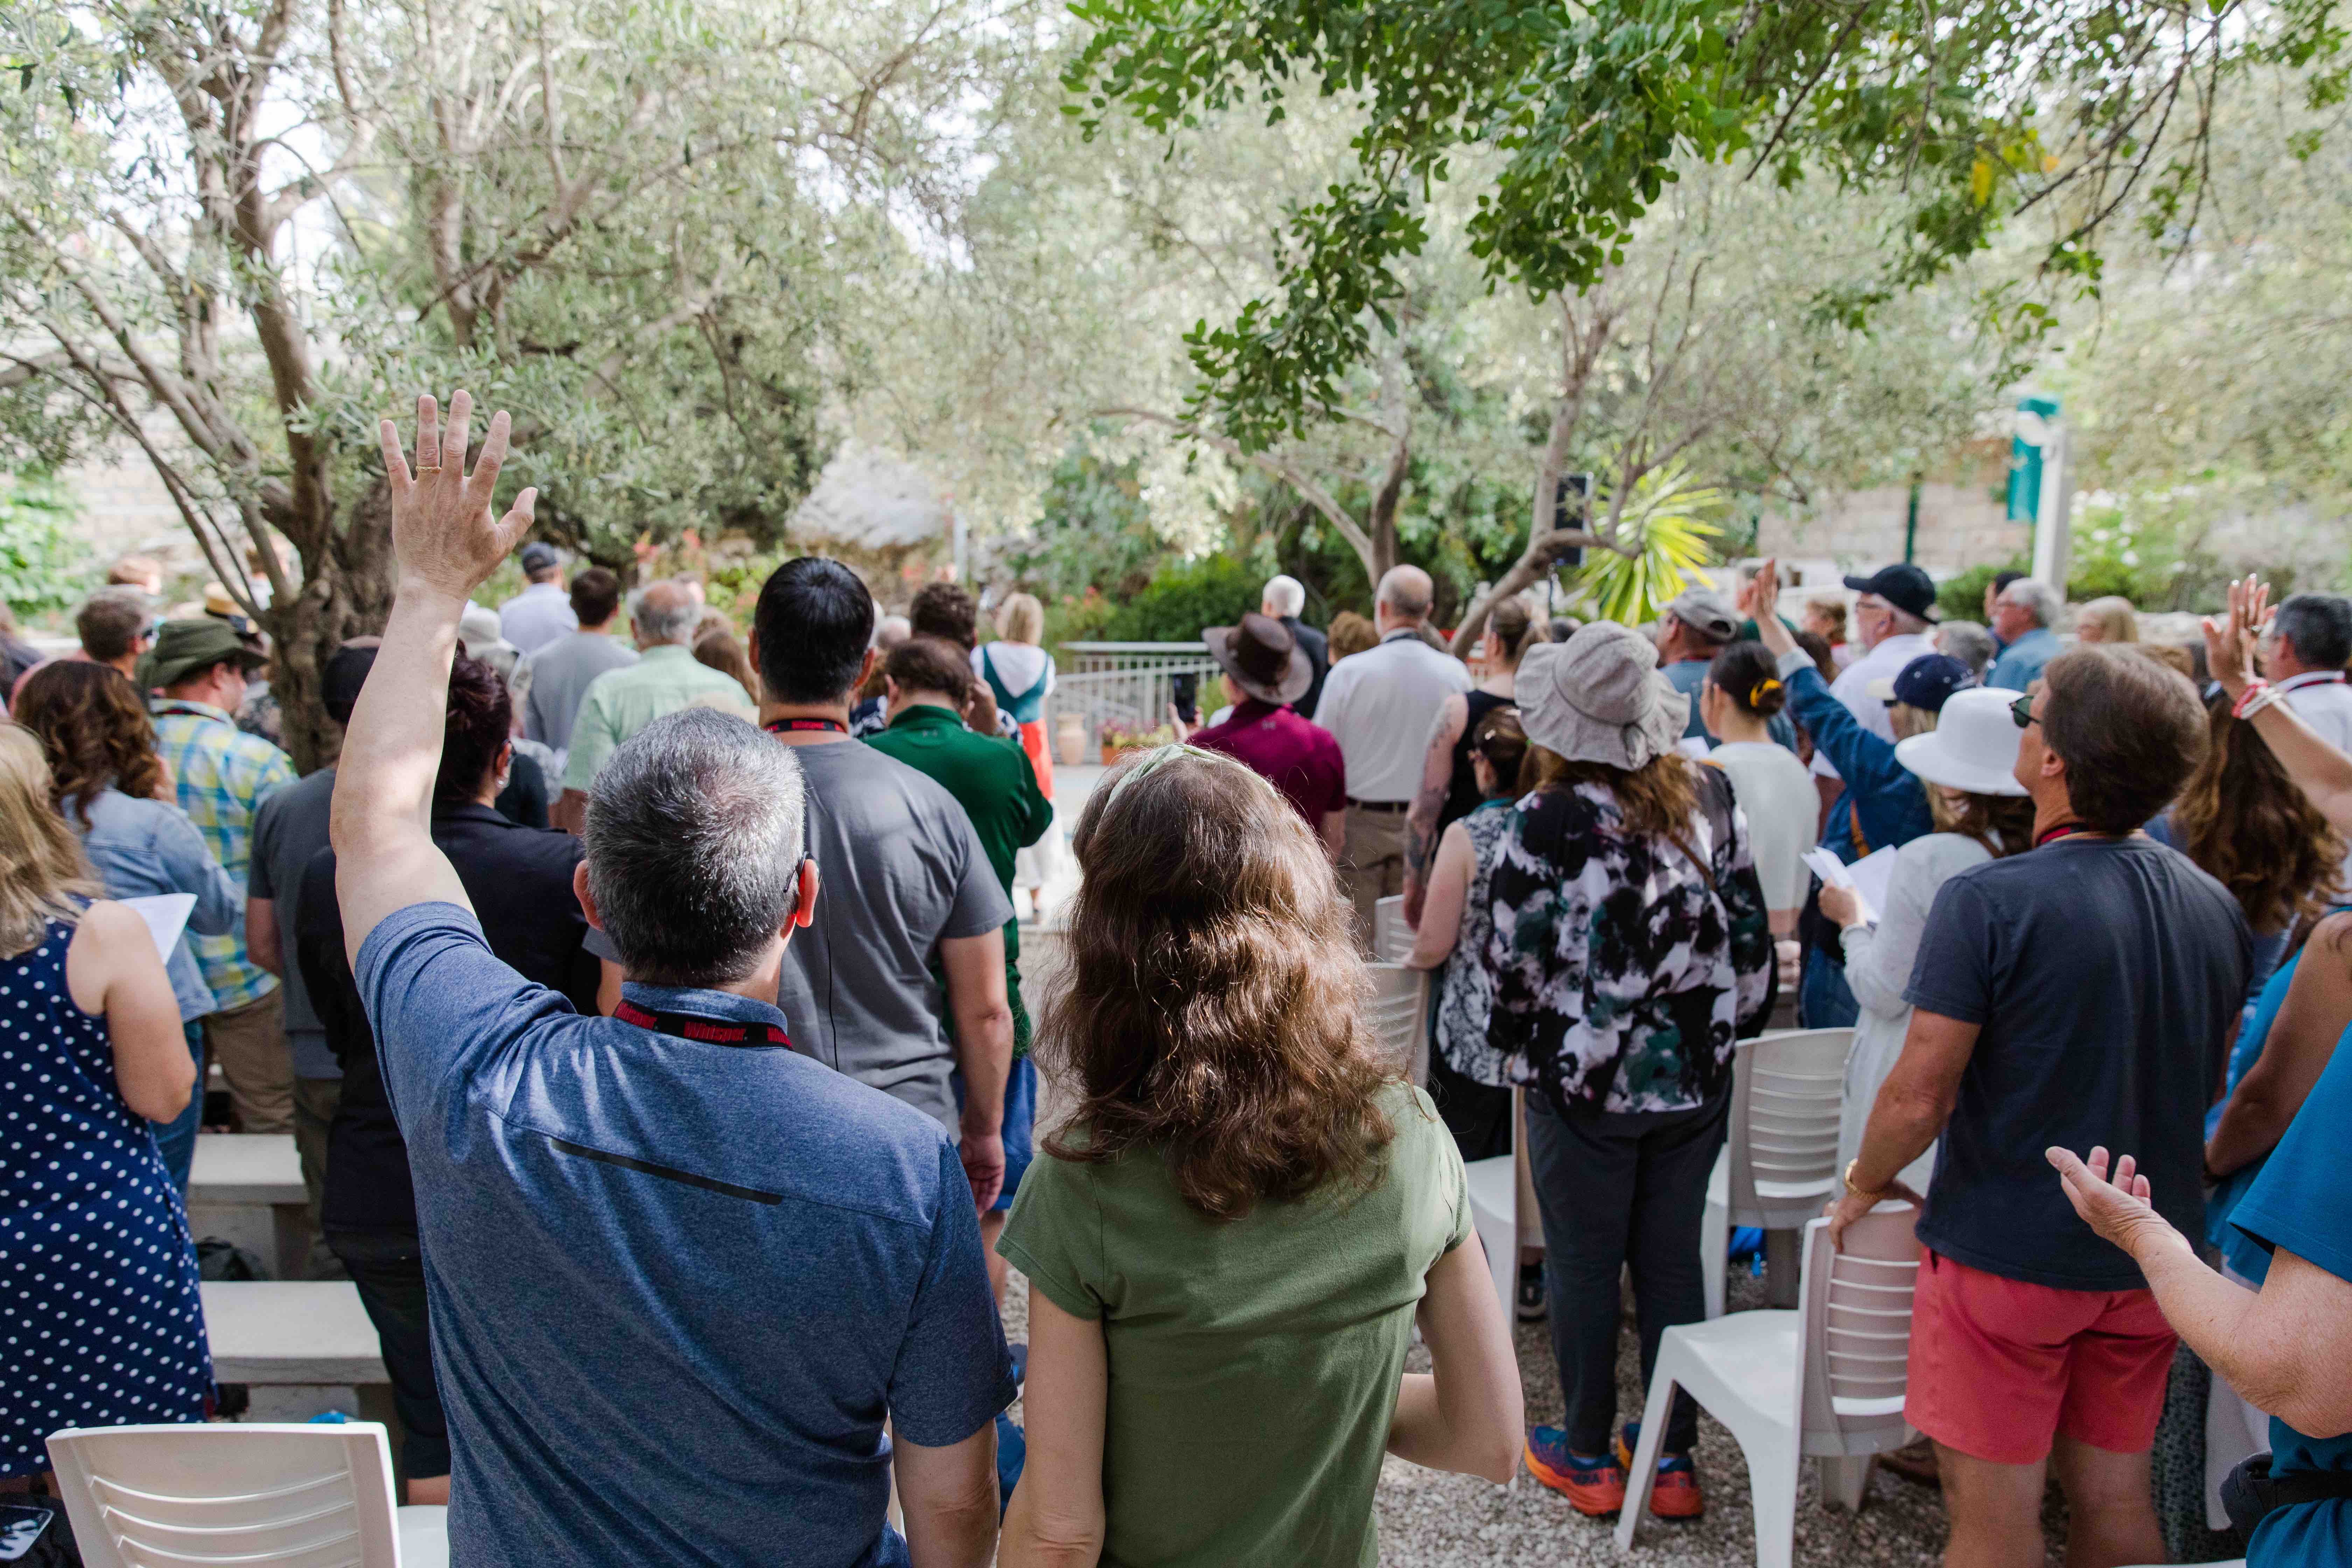 Group worshiping in the Garden of Gethsemane